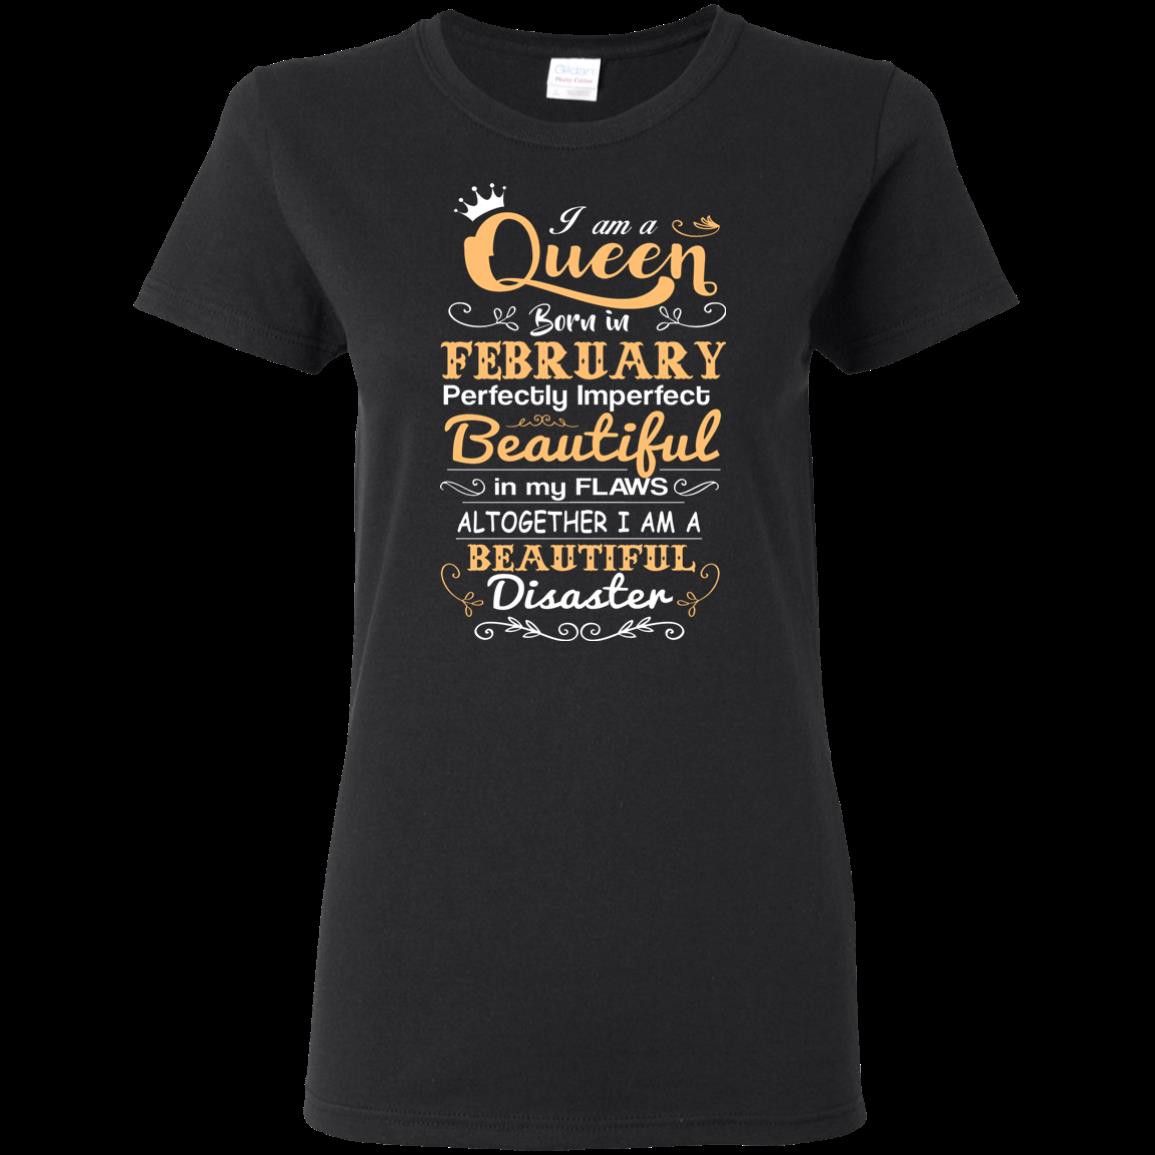 I Am A Queen Born In February Perfectly Imperfect Beautiful In My Flaws Altogether I Am A Beautiful Disaster T Shirt Hoodie Sweater